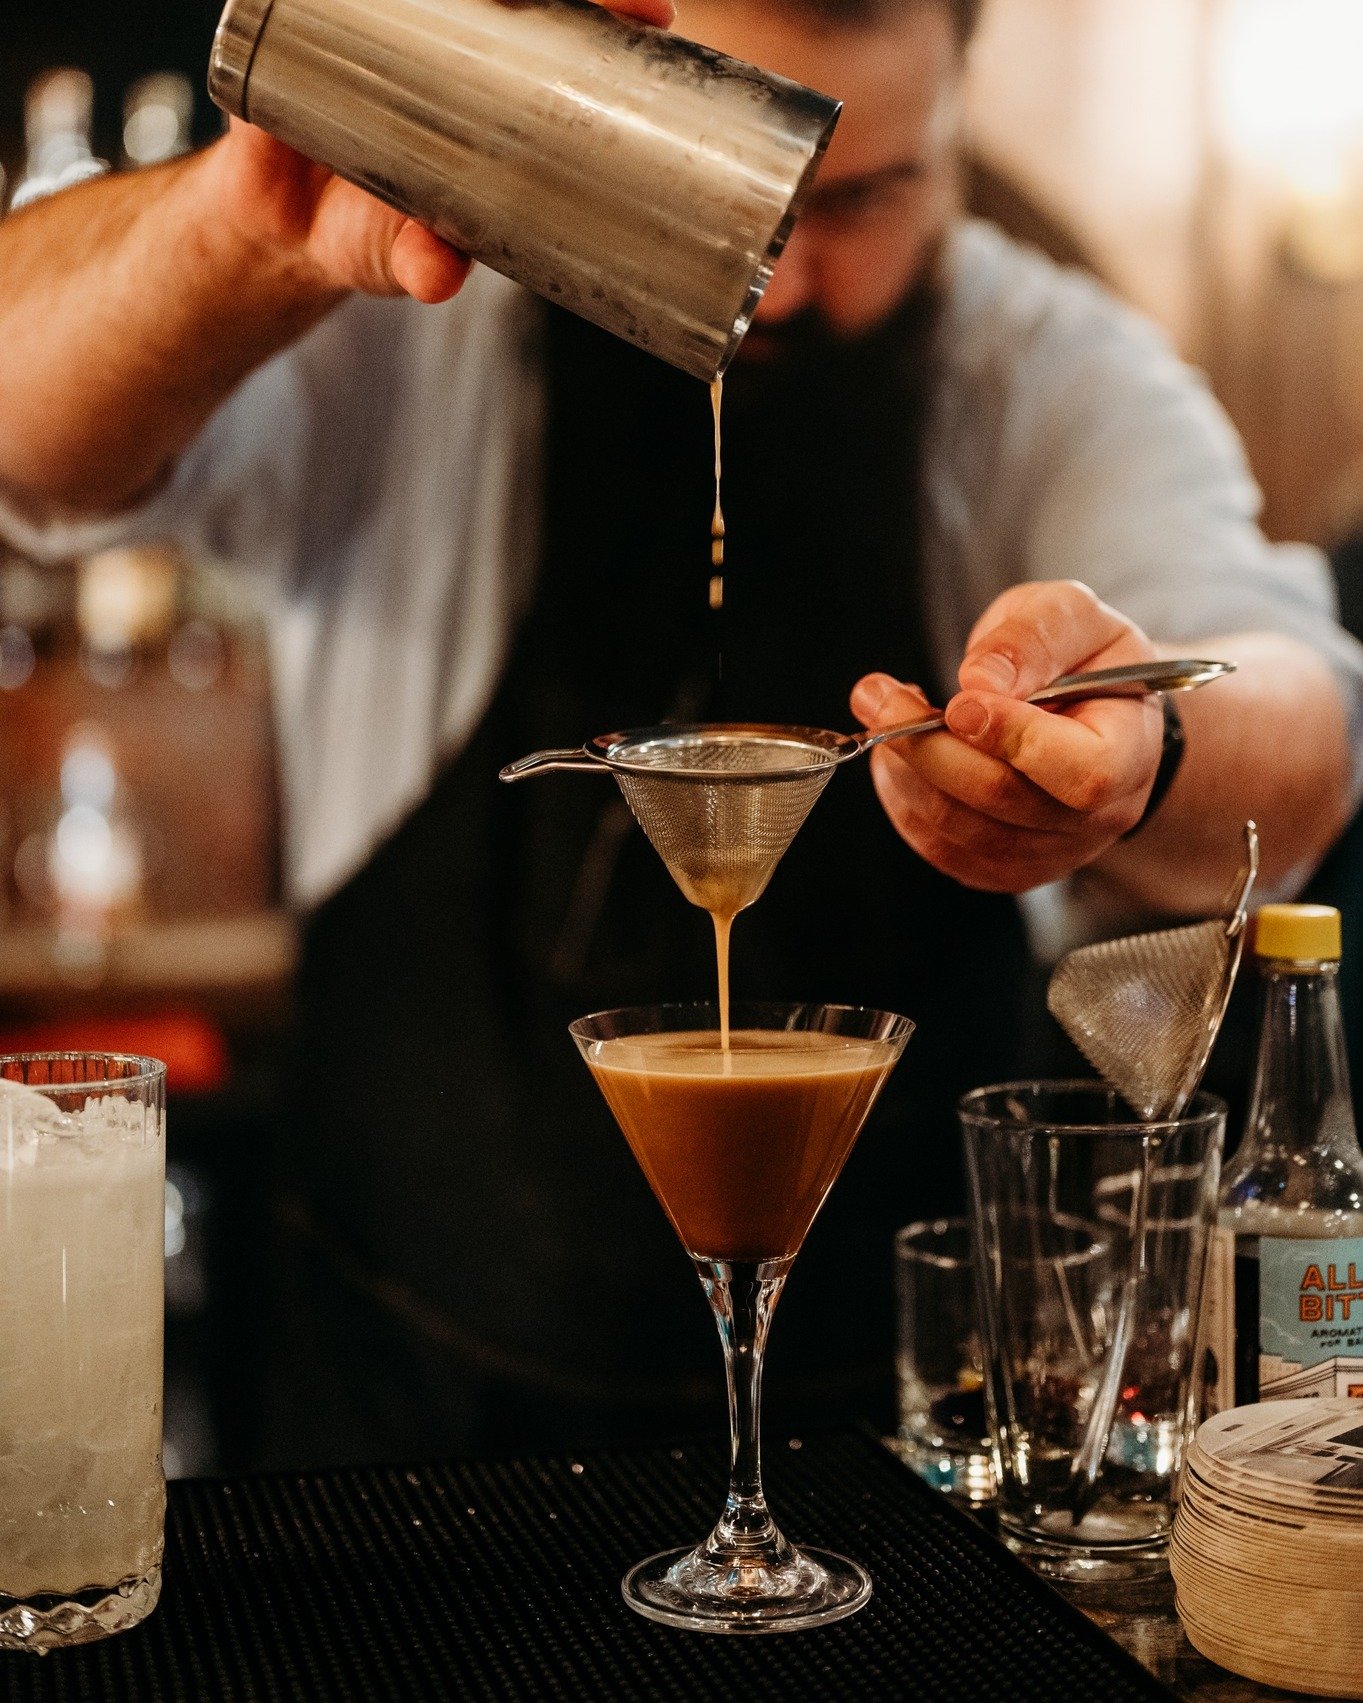 An Espresso Martini and dinner out of the house in a relaxing, yet glamorous atmosphere might be just what Mom needs this Mother's Day weekend. 

Reservation spots are filling up quickly, so book yours soon at mayflowertroy.com.